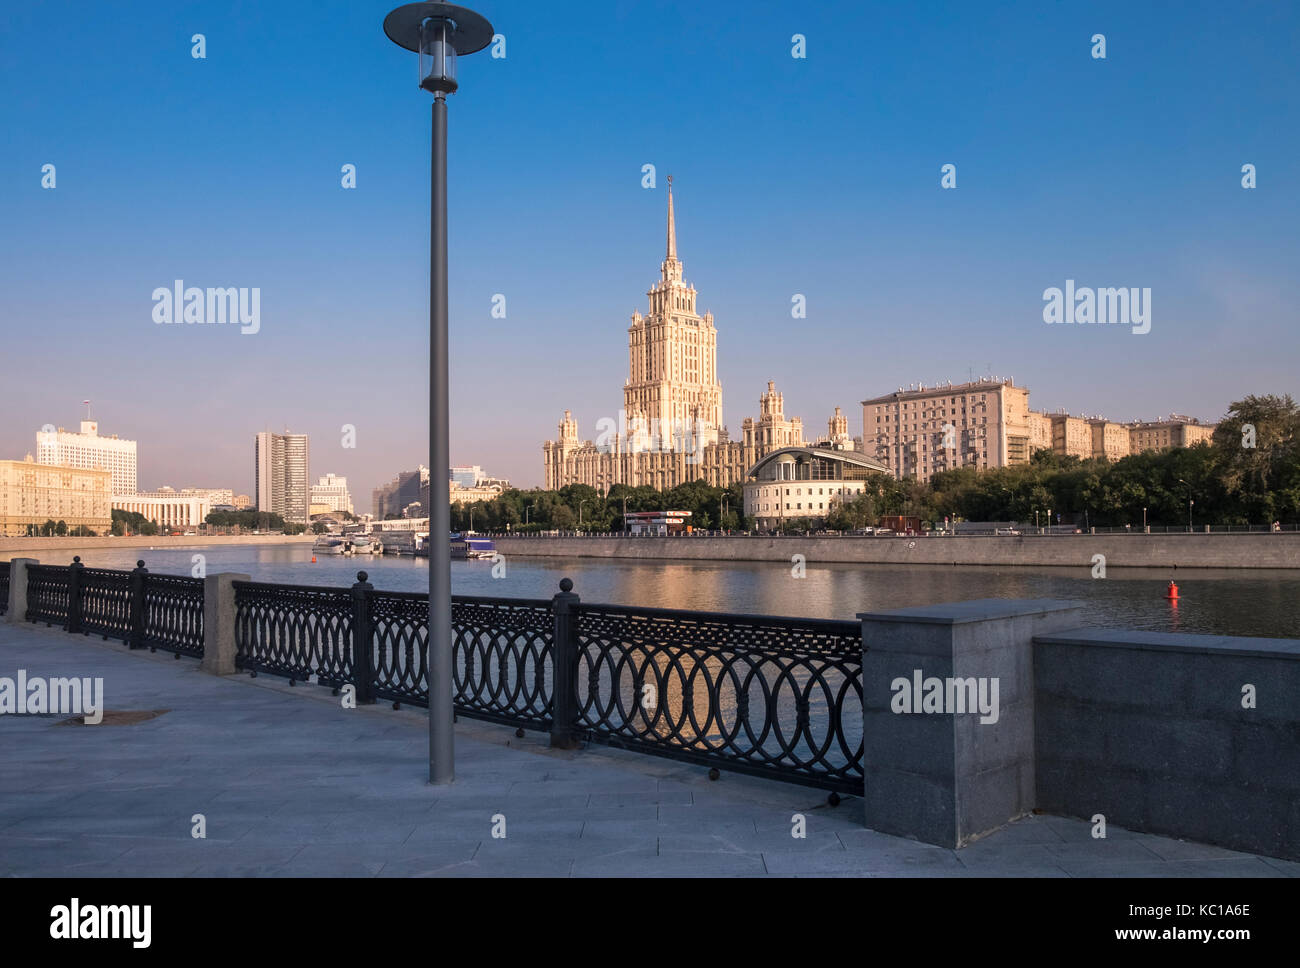 View along the Moskva River, Moscow, Russia, including the landmark 5 star Radisson Royal Hotel. Stock Photo